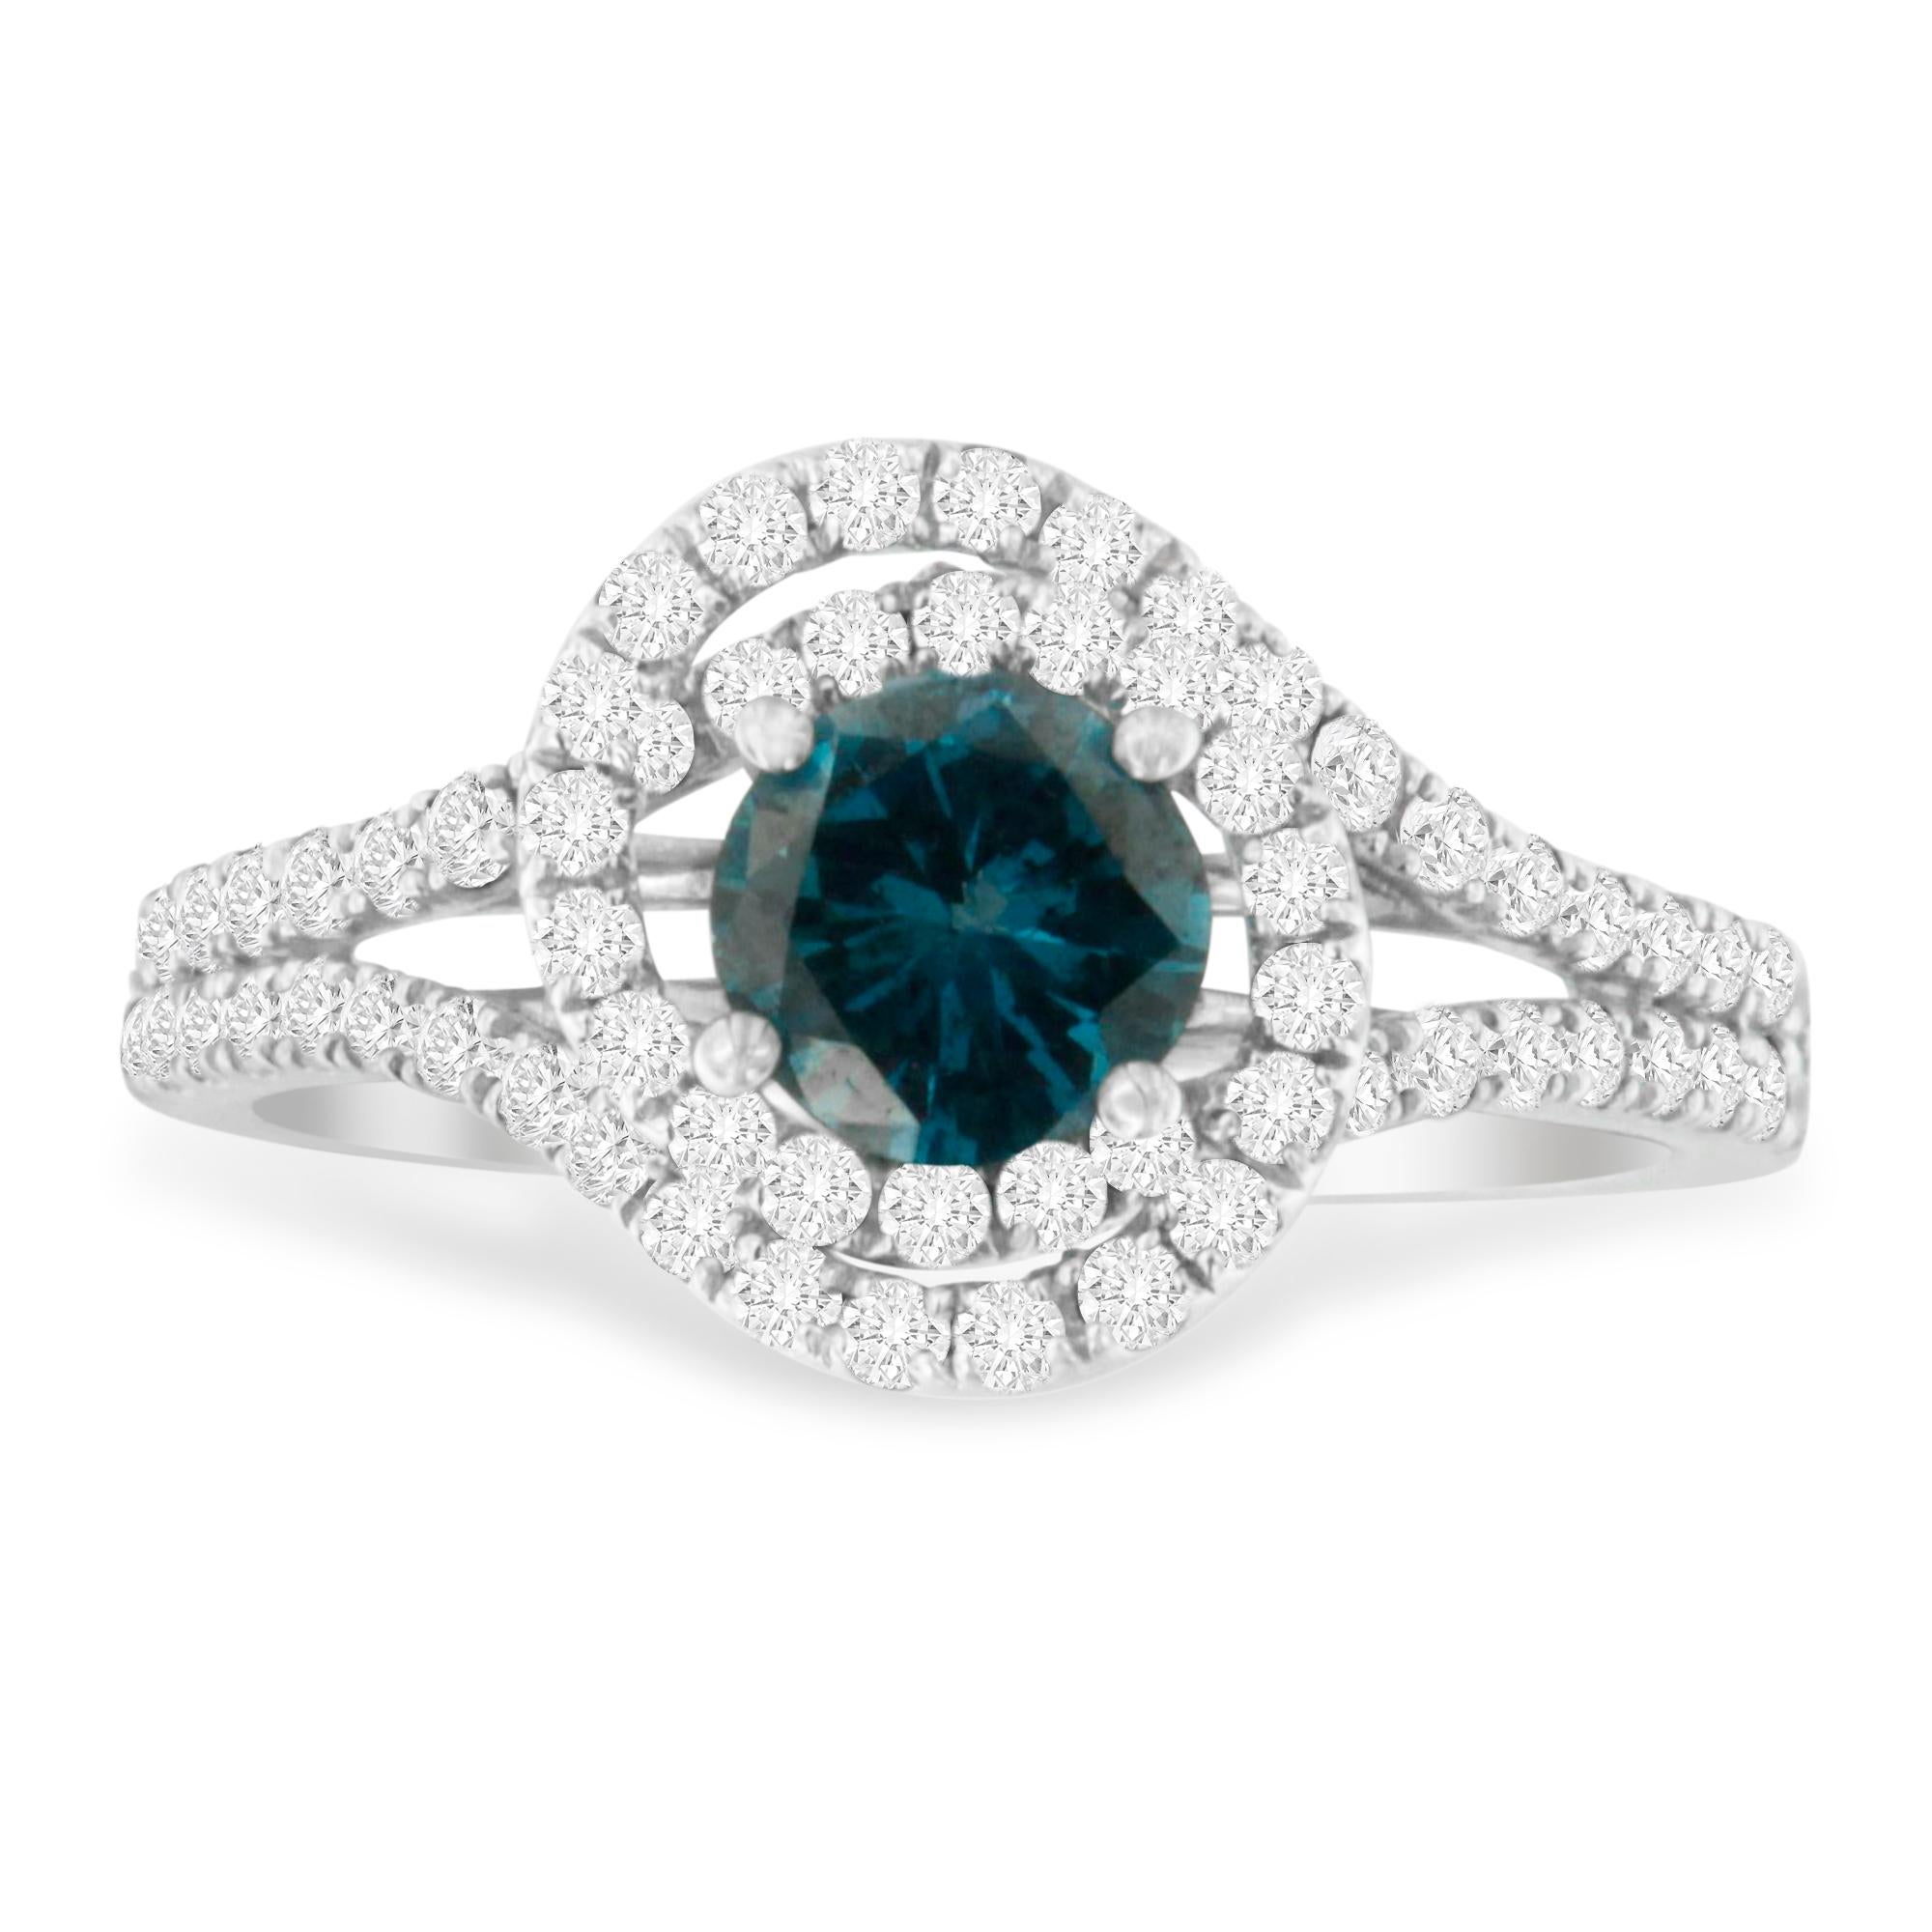 This charming ring features a .75 round treated blue diamond in the center surrounded by a halo of round white diamonds. The split shank band set with further round diamonds adds extra sparkle to this design. It has a total diamond weight of 1 1/3